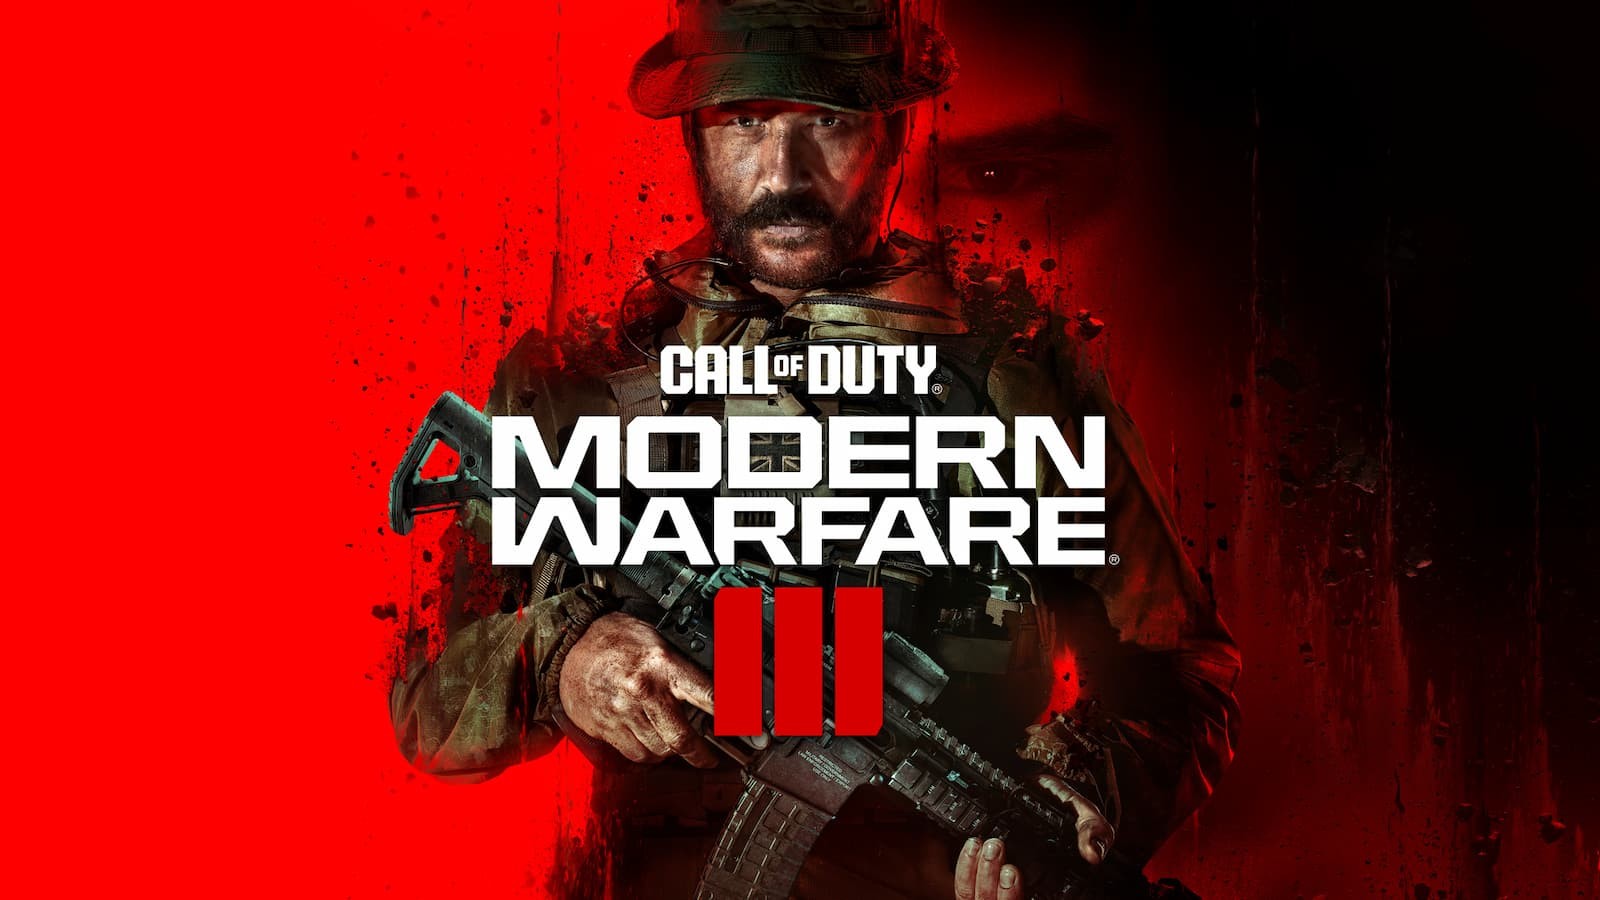 Call of Duty: Modern Warfare 3 is the most downloaded game on PS5 in both US/Canada and EU.